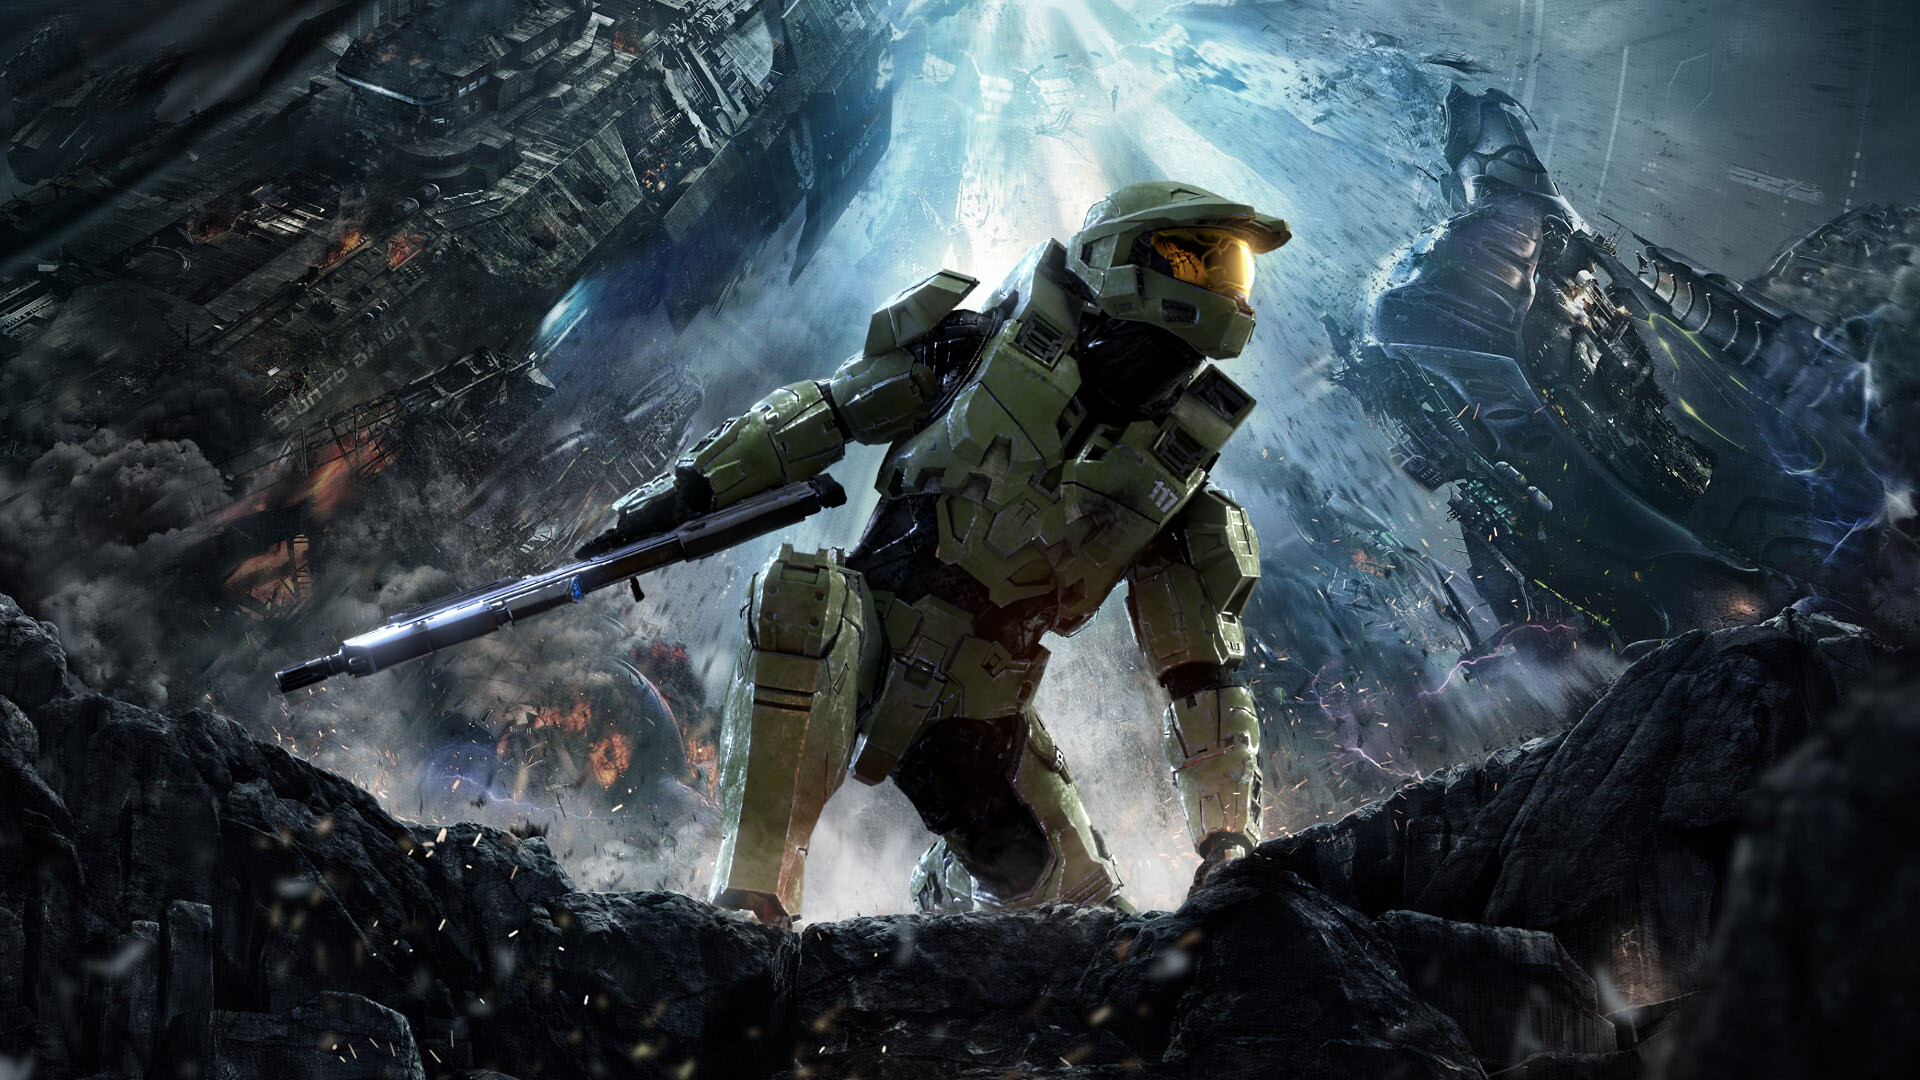 Halo 4 Cover Art with Infinite Master Chief.